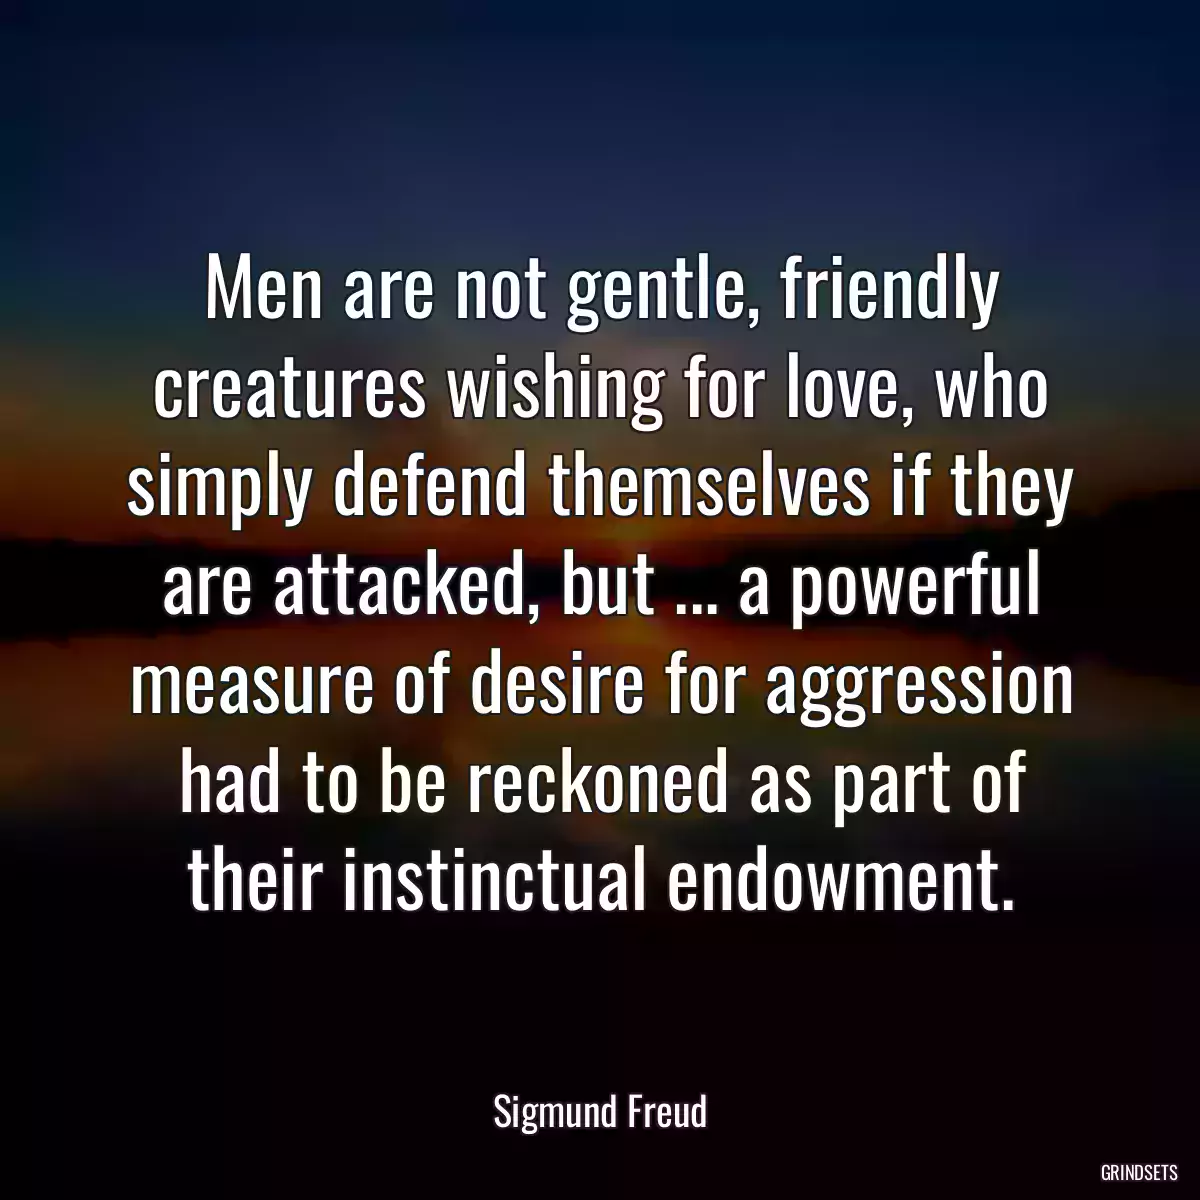 Men are not gentle, friendly creatures wishing for love, who simply defend themselves if they are attacked, but ... a powerful measure of desire for aggression had to be reckoned as part of their instinctual endowment.